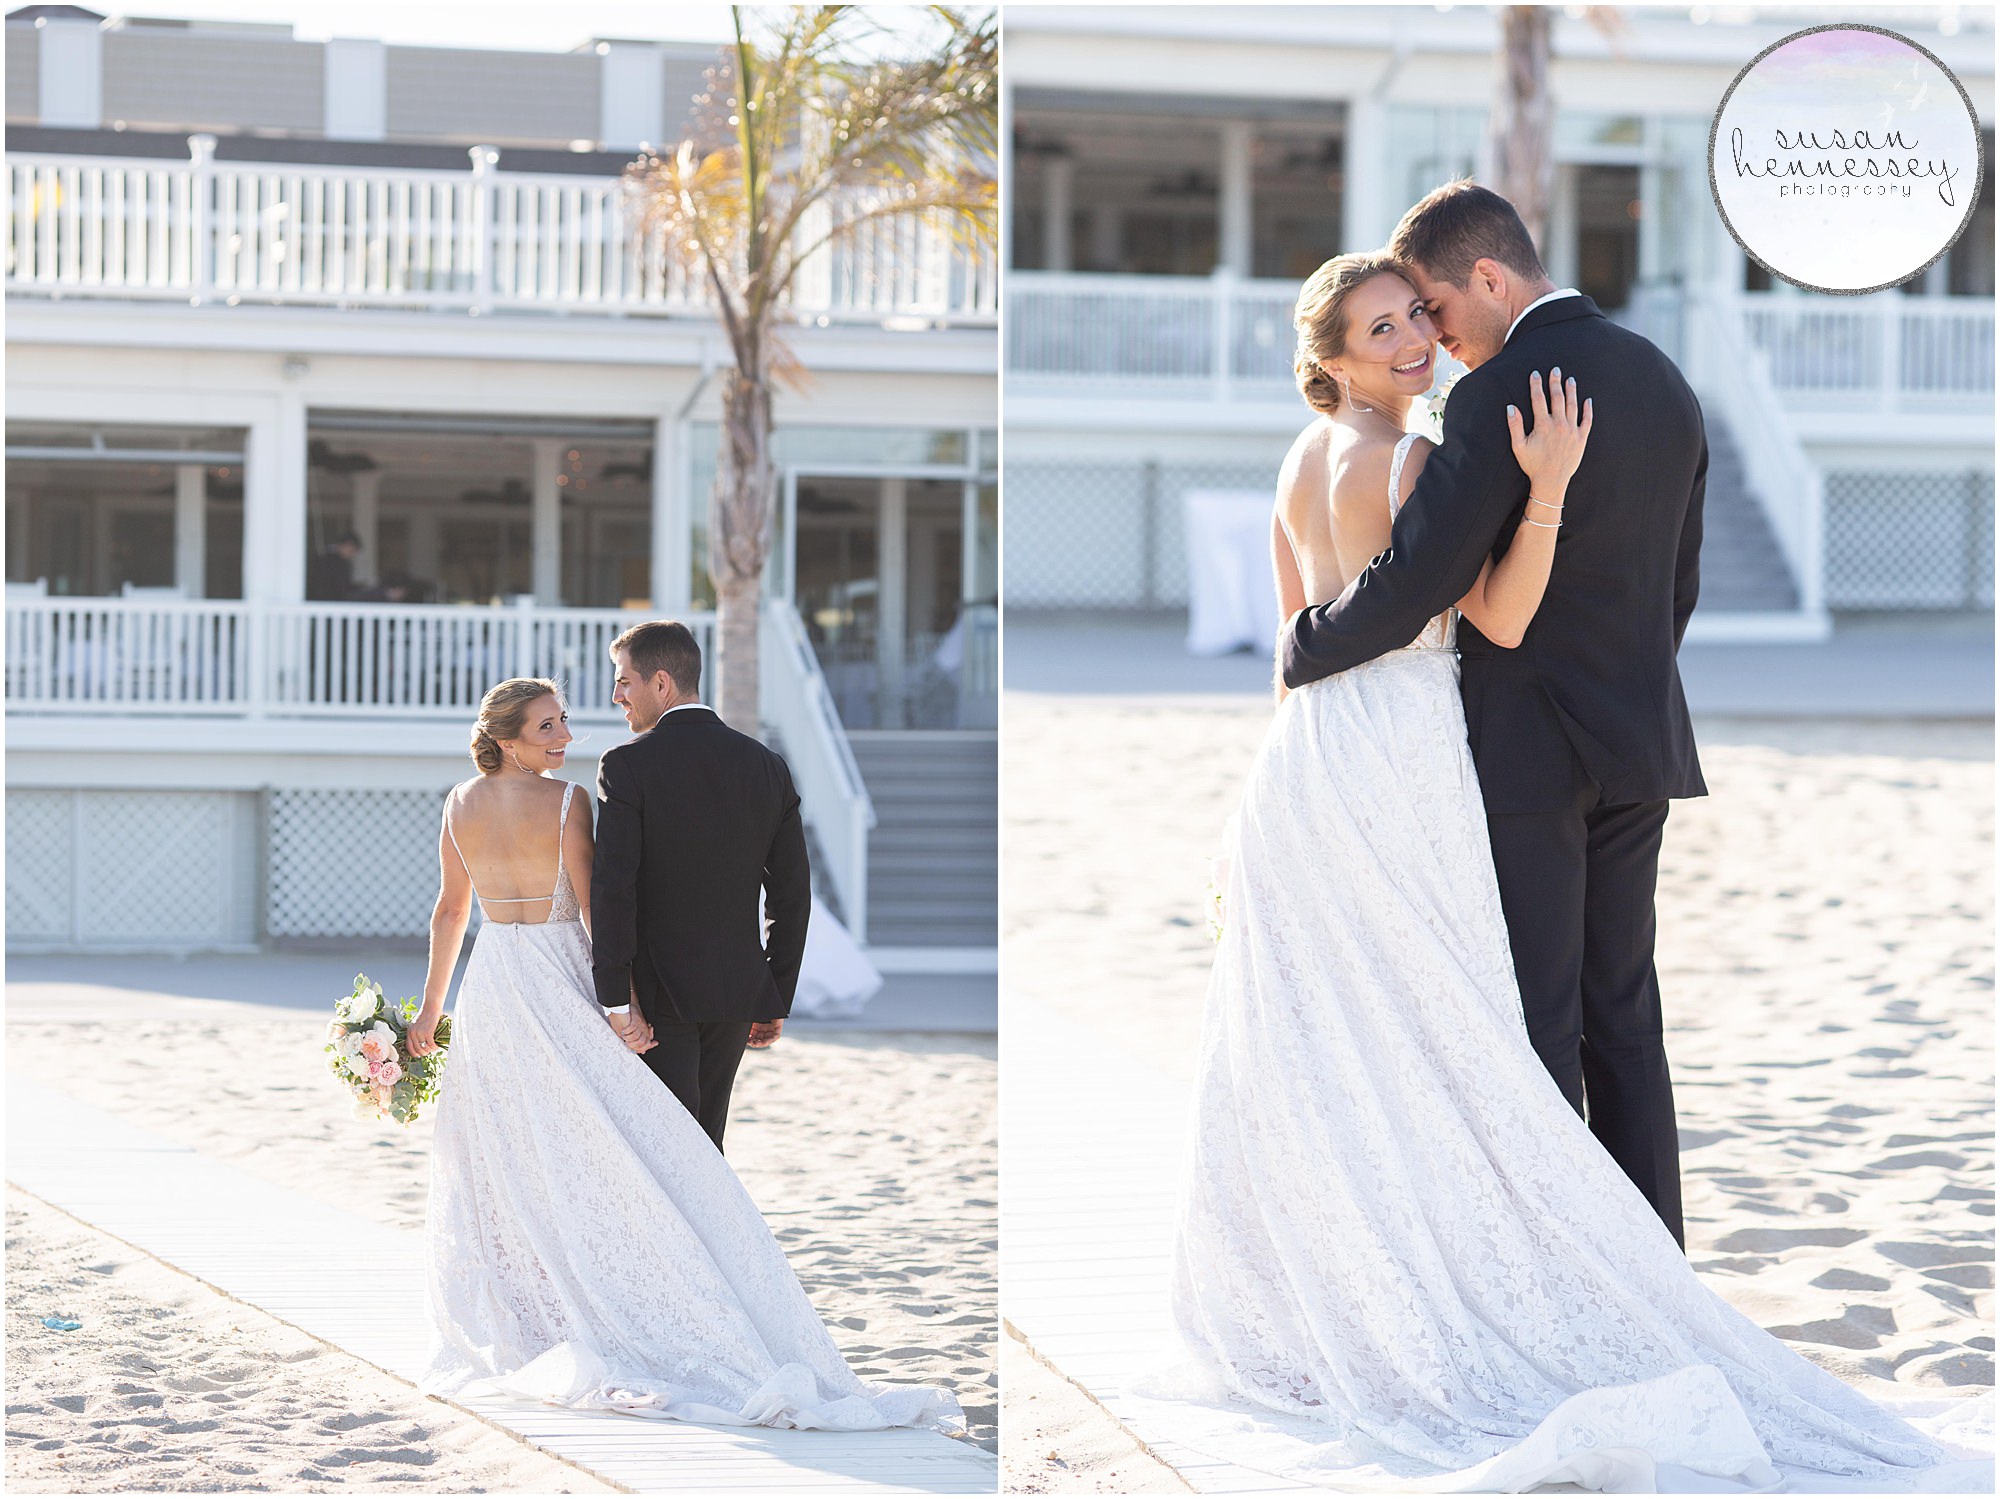 Bride and groom portraits at Windows on the Water wedding